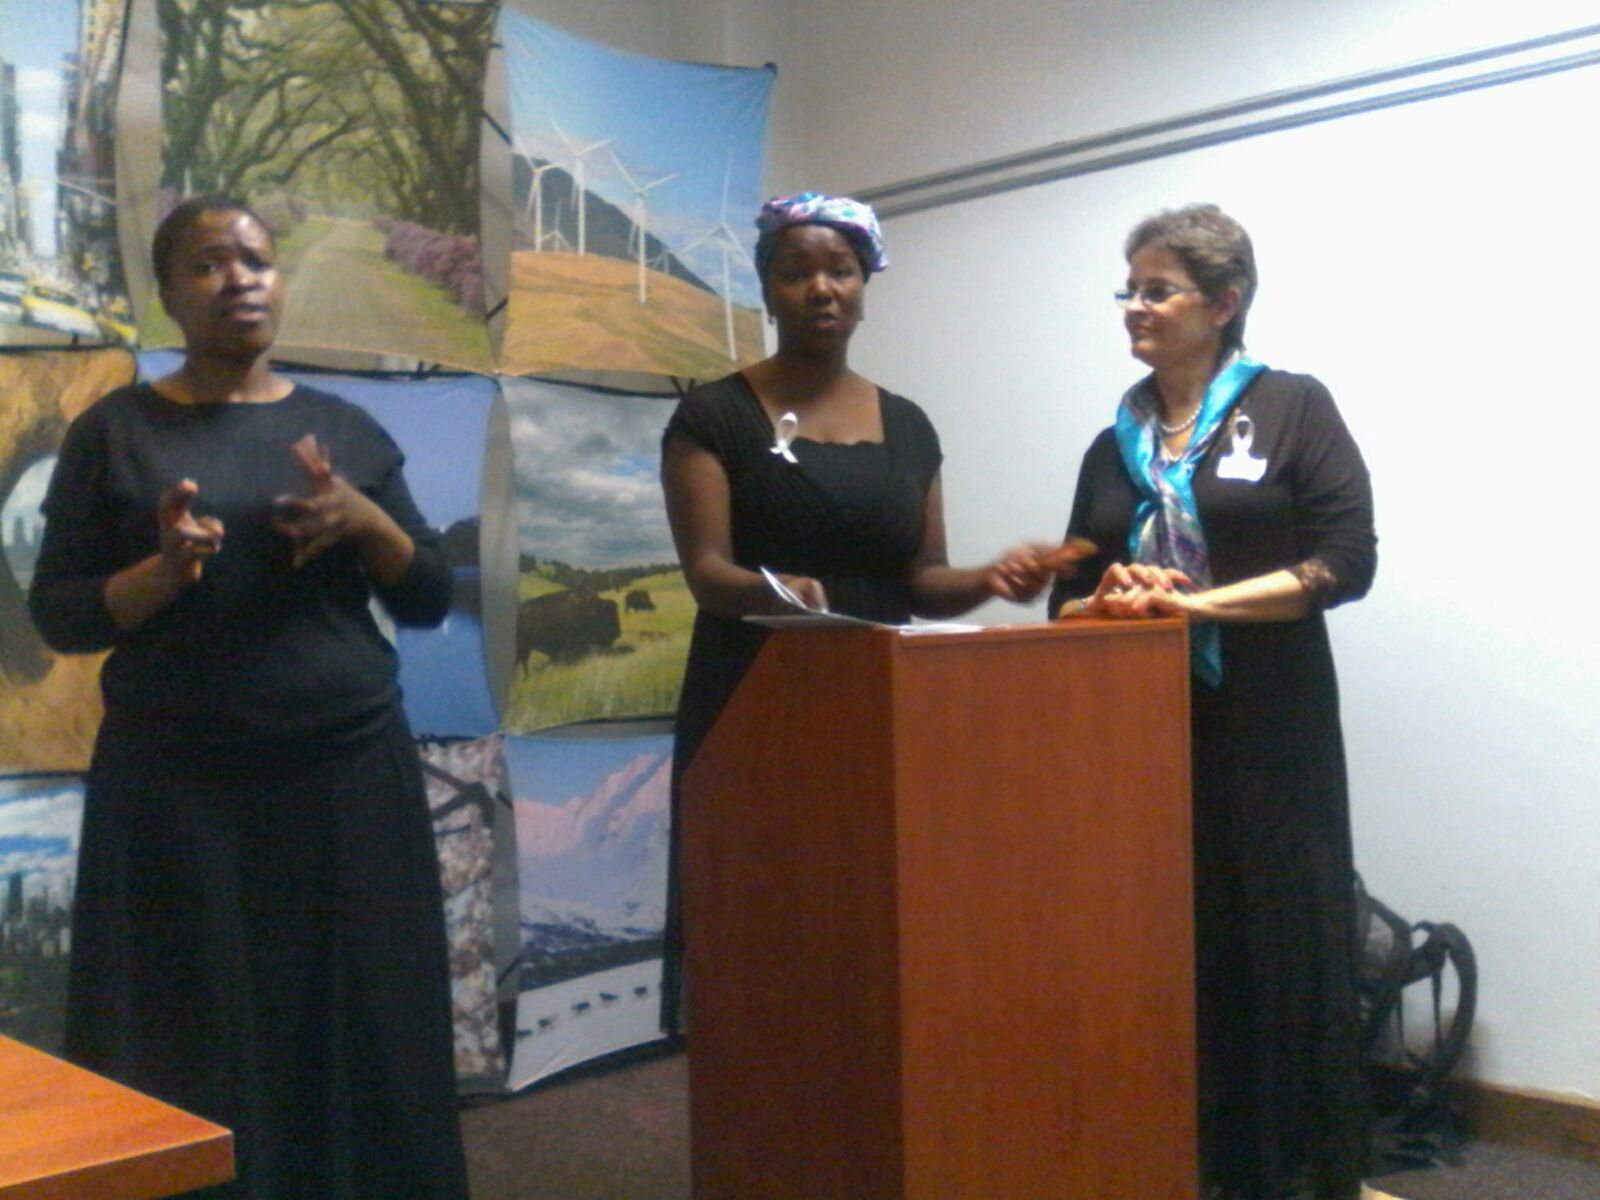 Ms. T Mokoena, Ms. A Humphries-Heyns with the Sign Language Interpreter Ms. S Thahamane